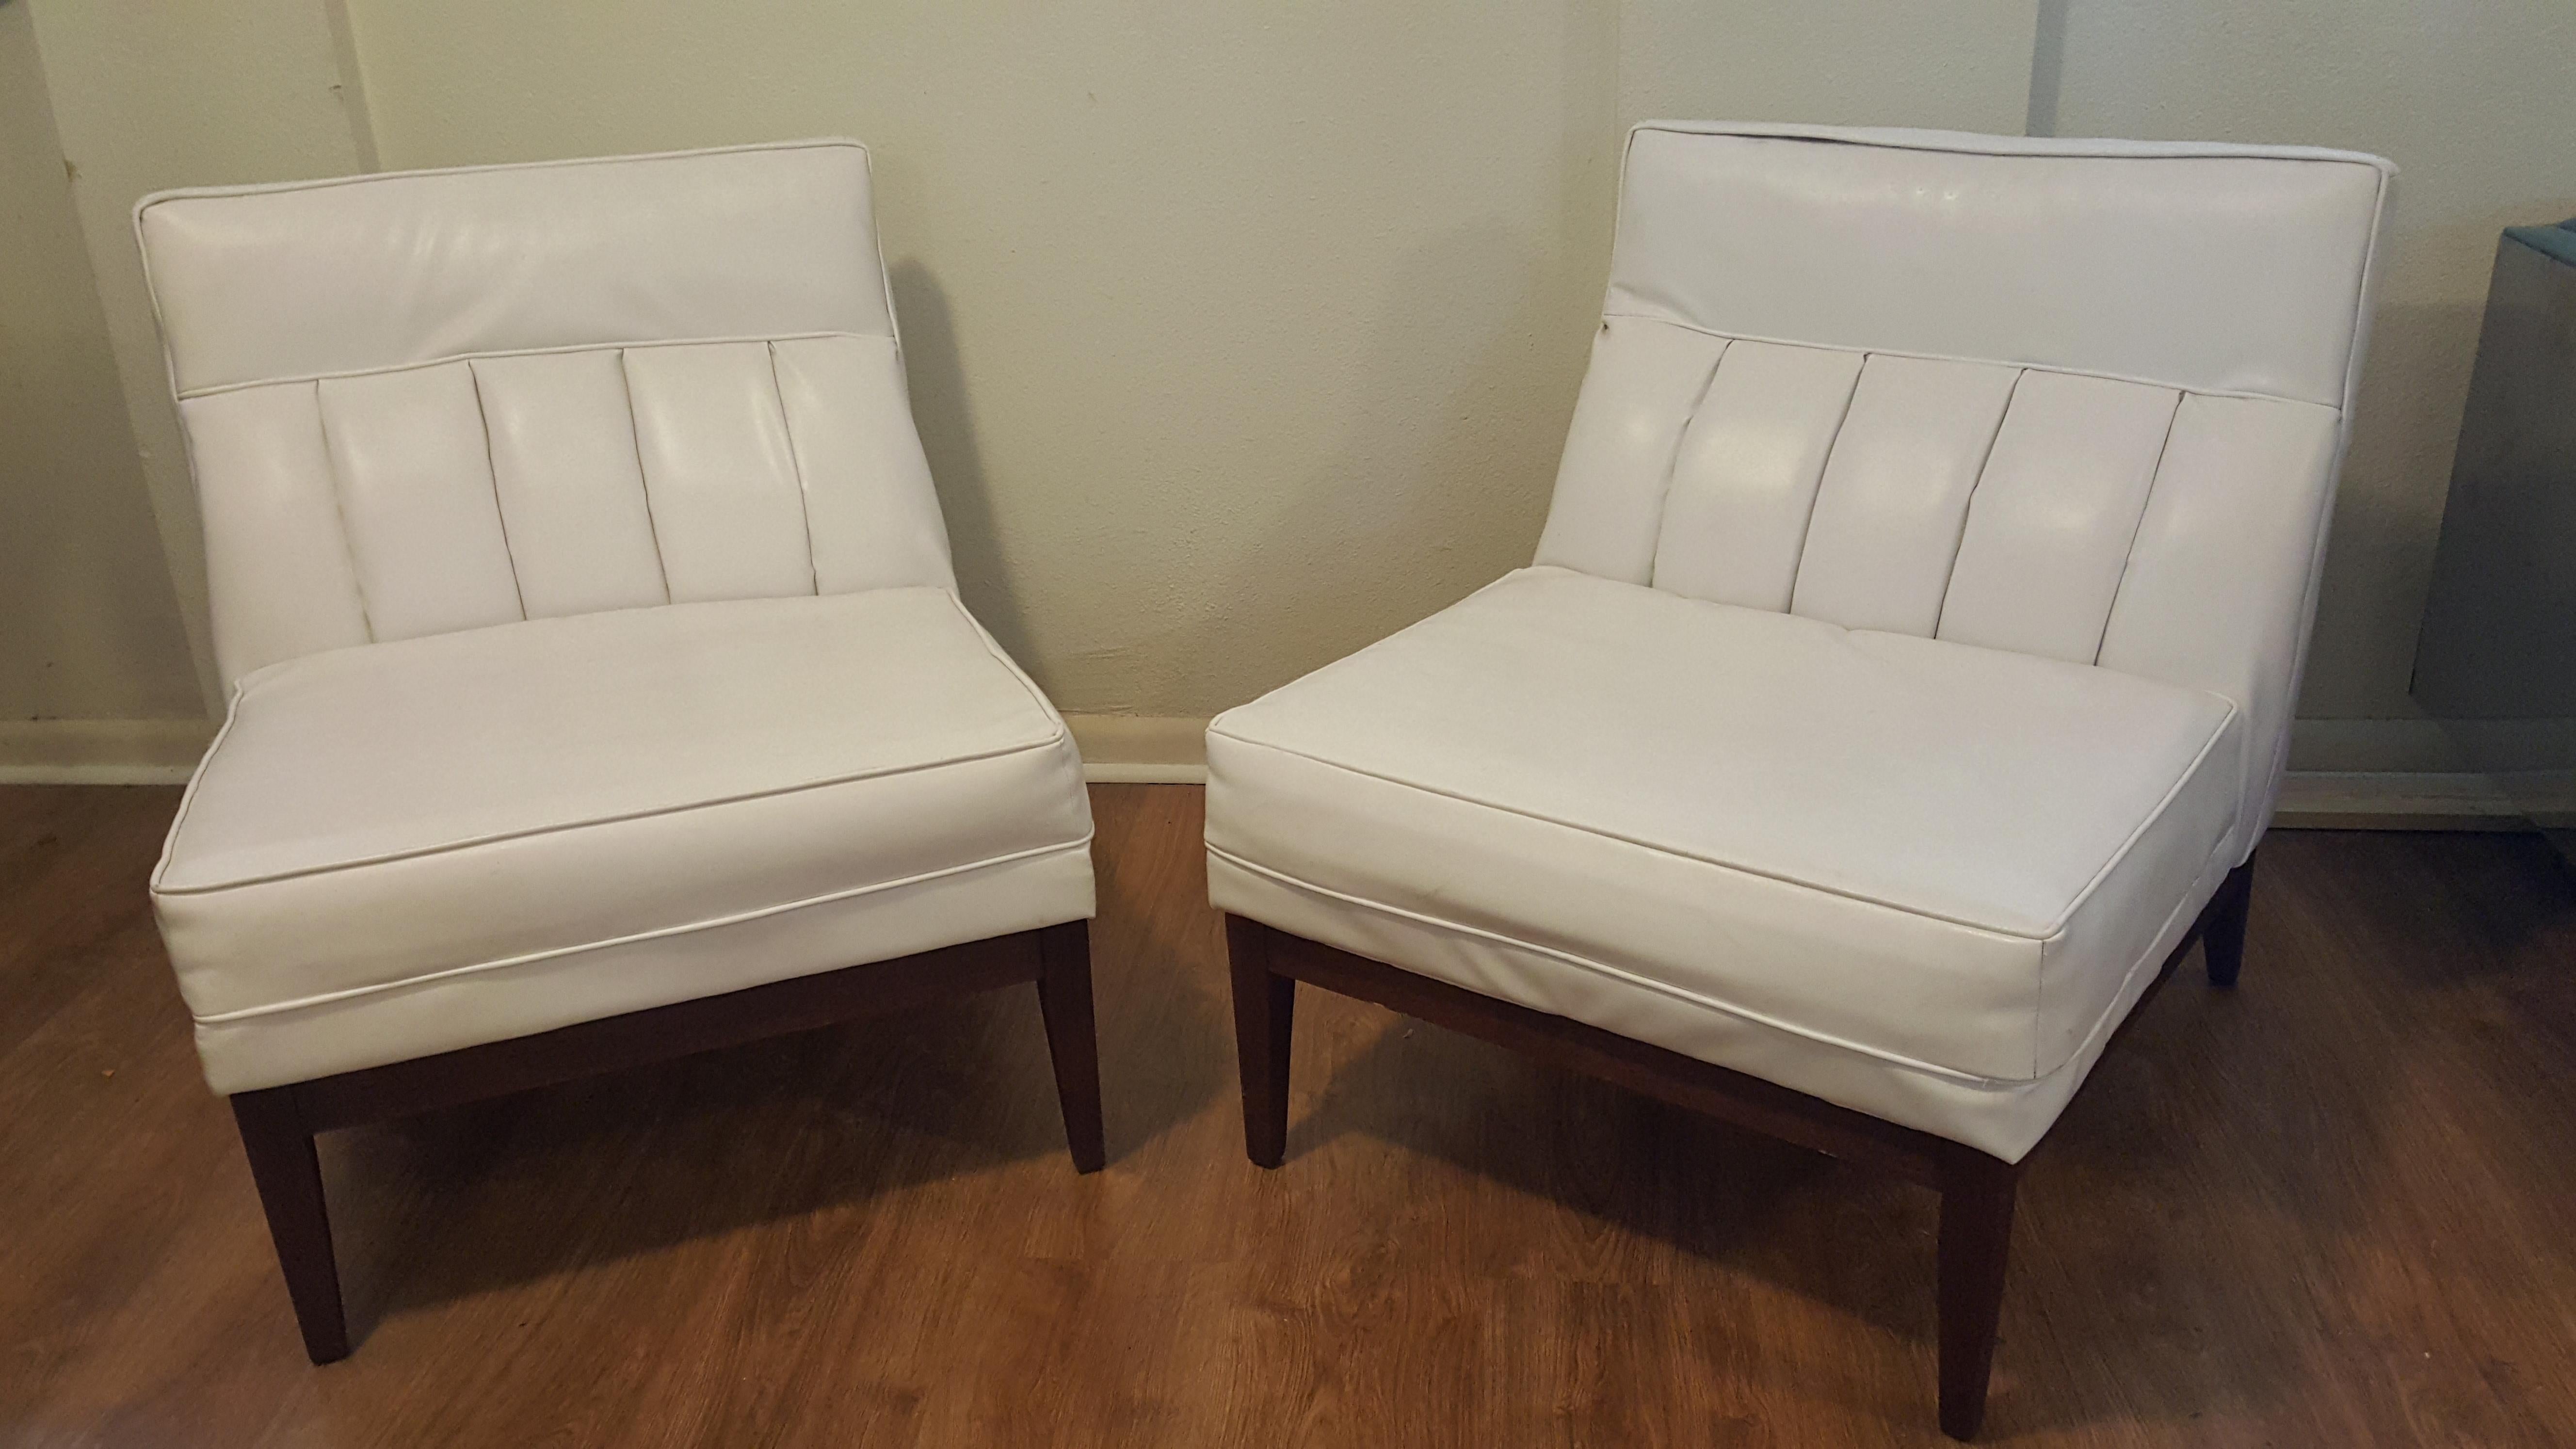 Pair of Midcentury Armless Slipper Chairs In Fair Condition For Sale In Houston, TX